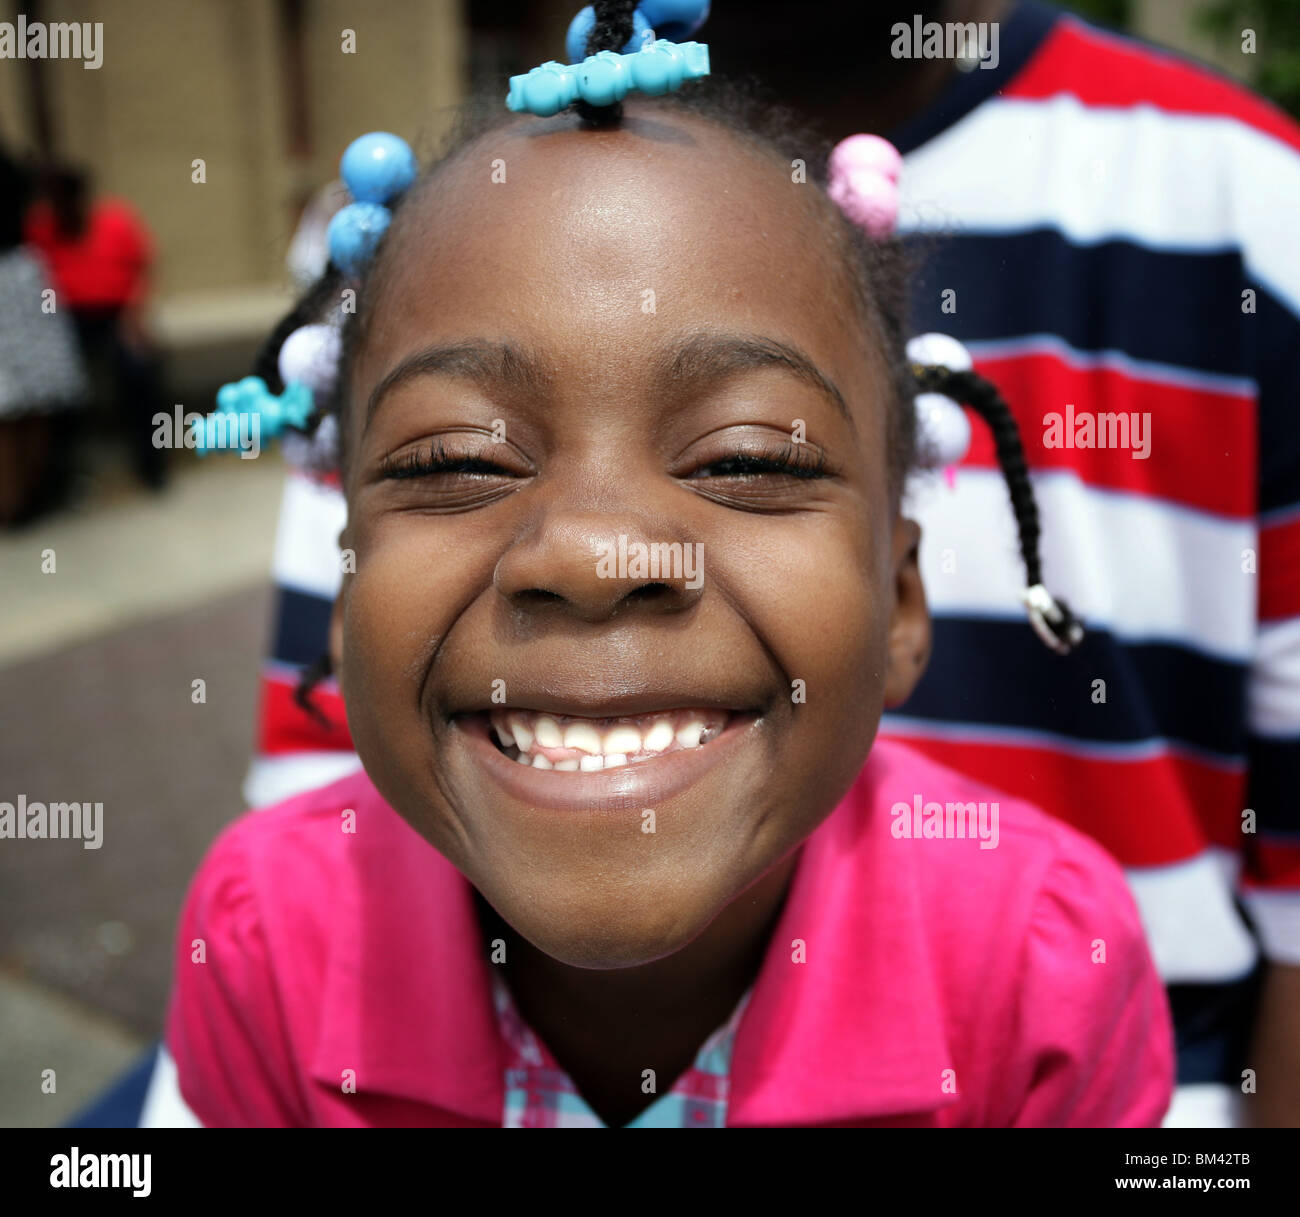 A cute 'African American' girl shows off her smile during a parade in New Haven CT USA Stock Photo